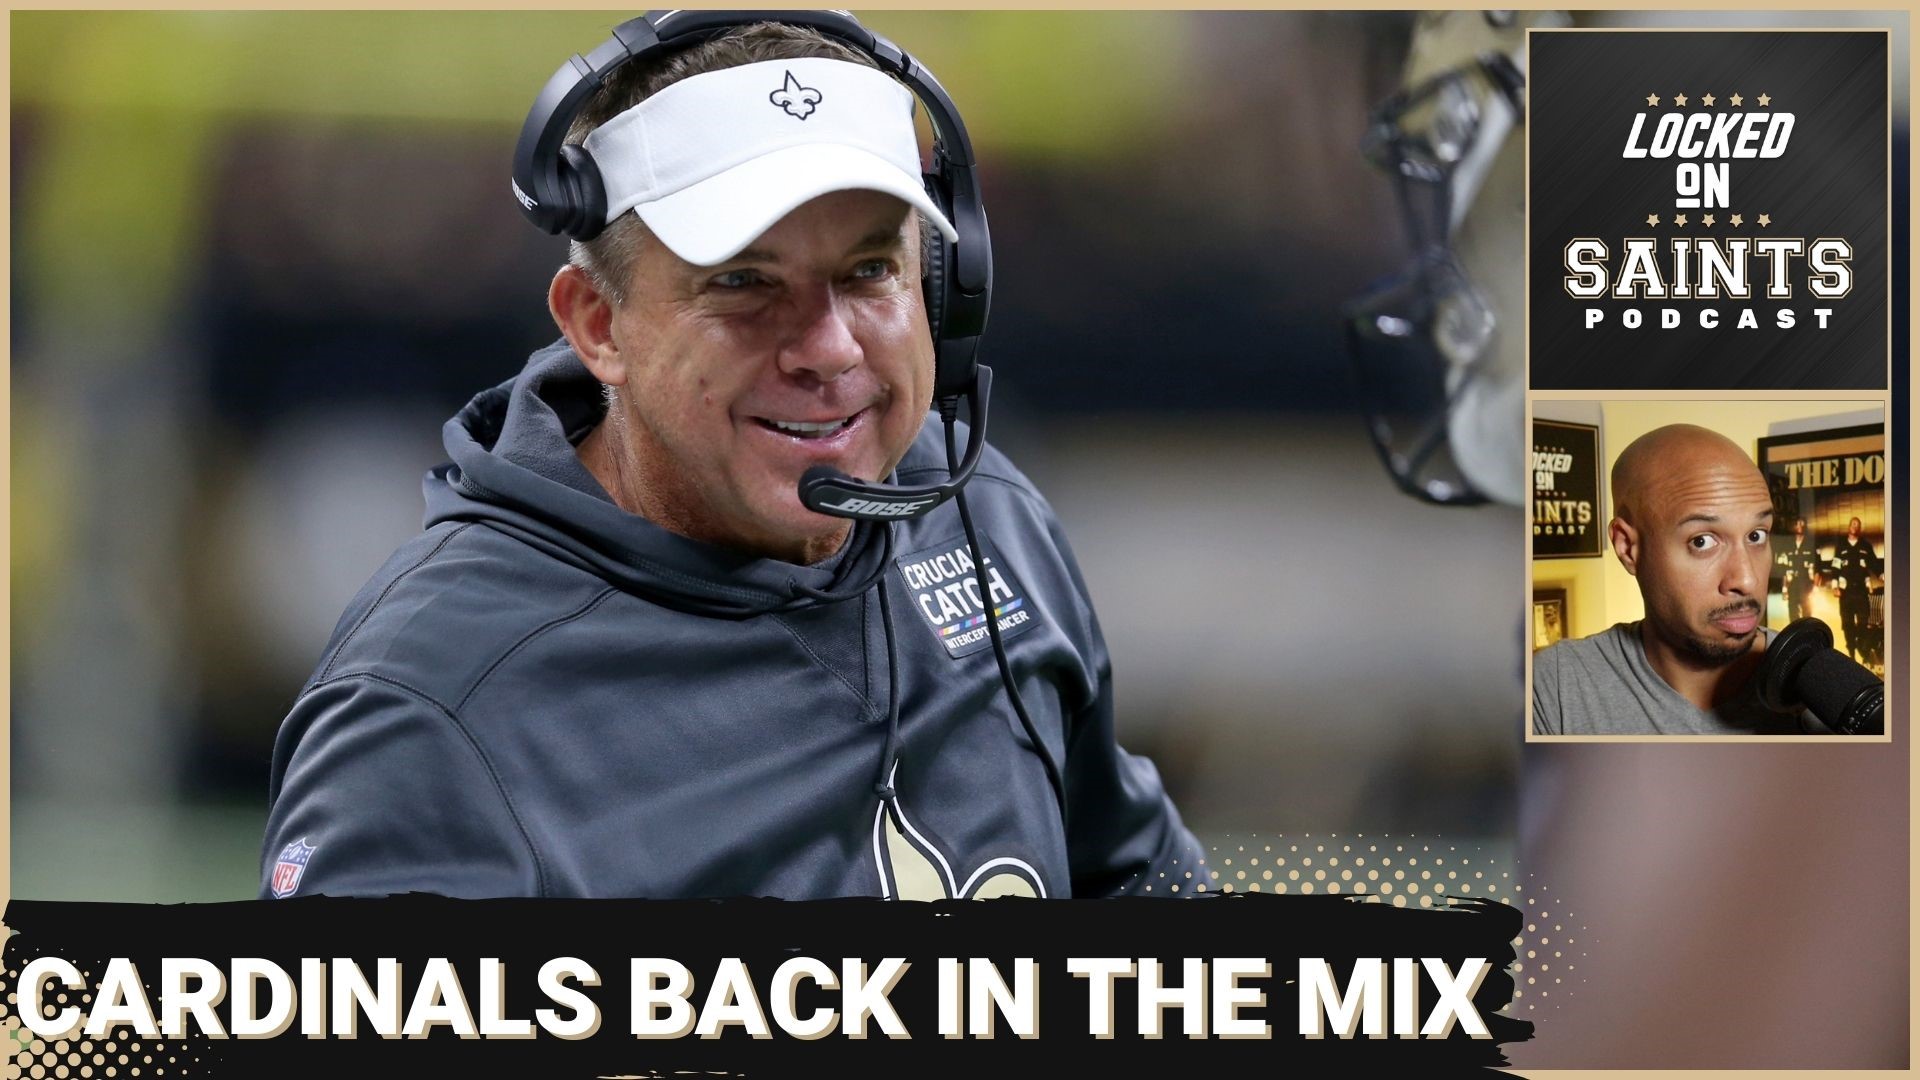 The Arizona Cardinals finally scheduled an interview with former New Orleans Saints head coach Sean Payton and that’s great news for the Big Easy.